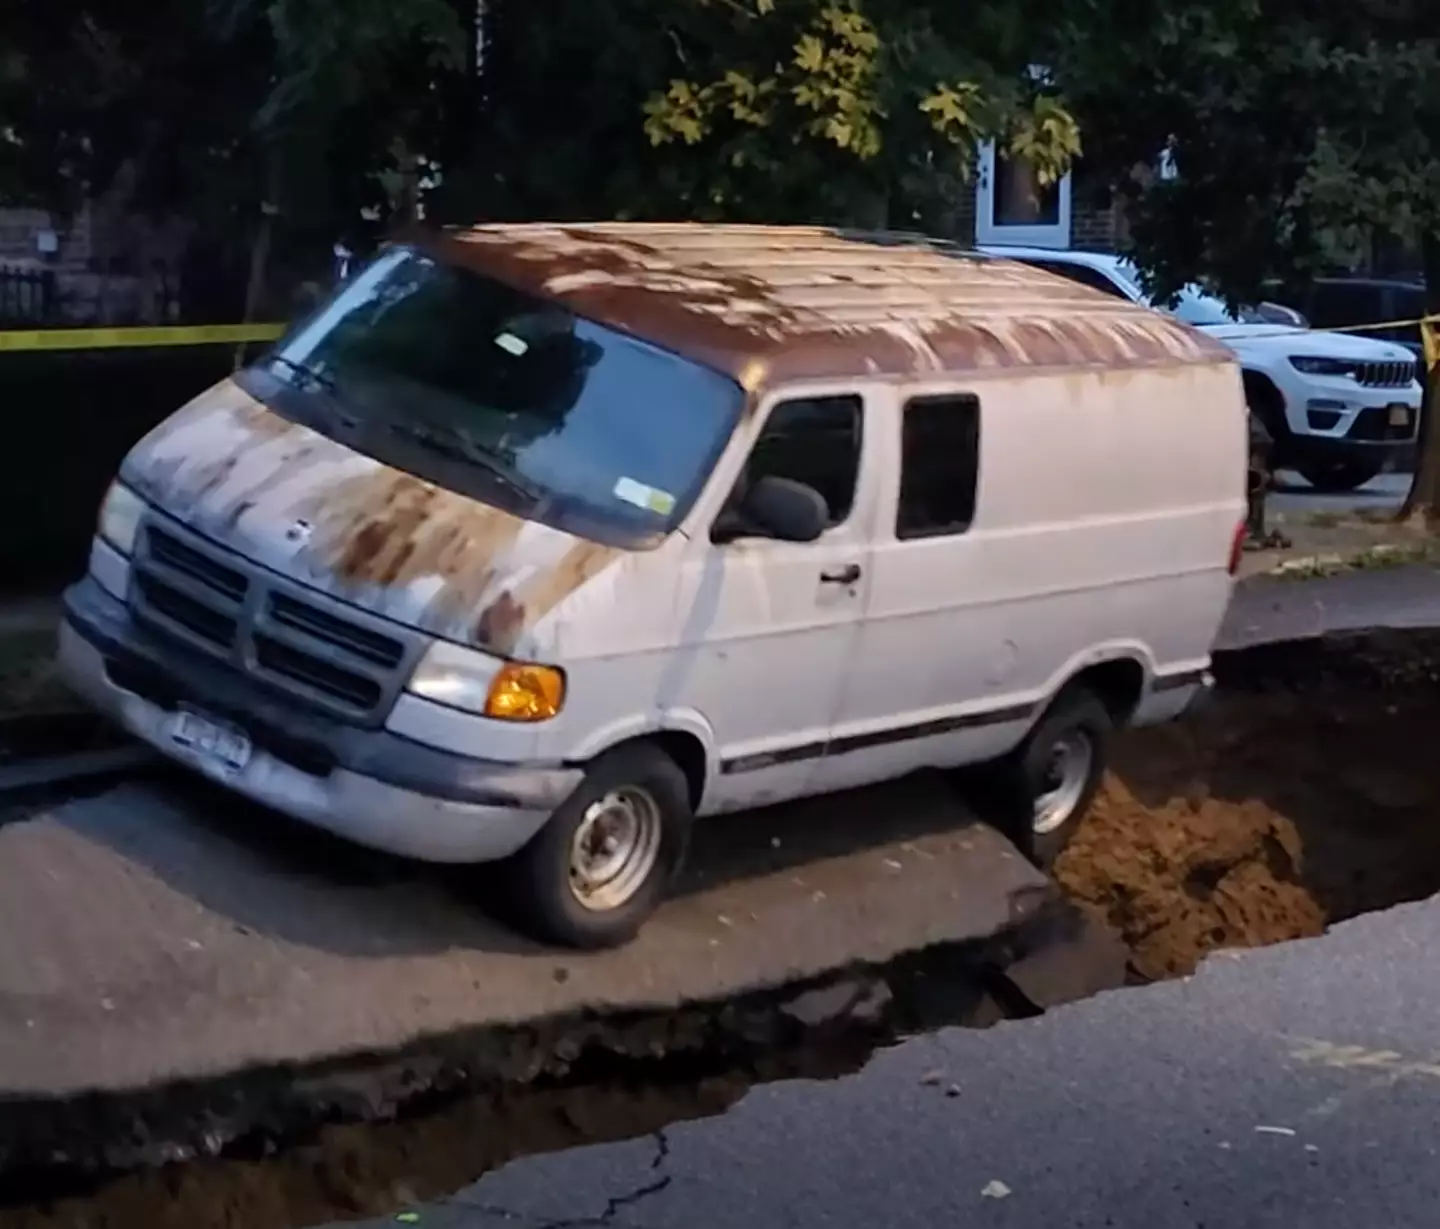 The van's owner was even there to watch it fall in.